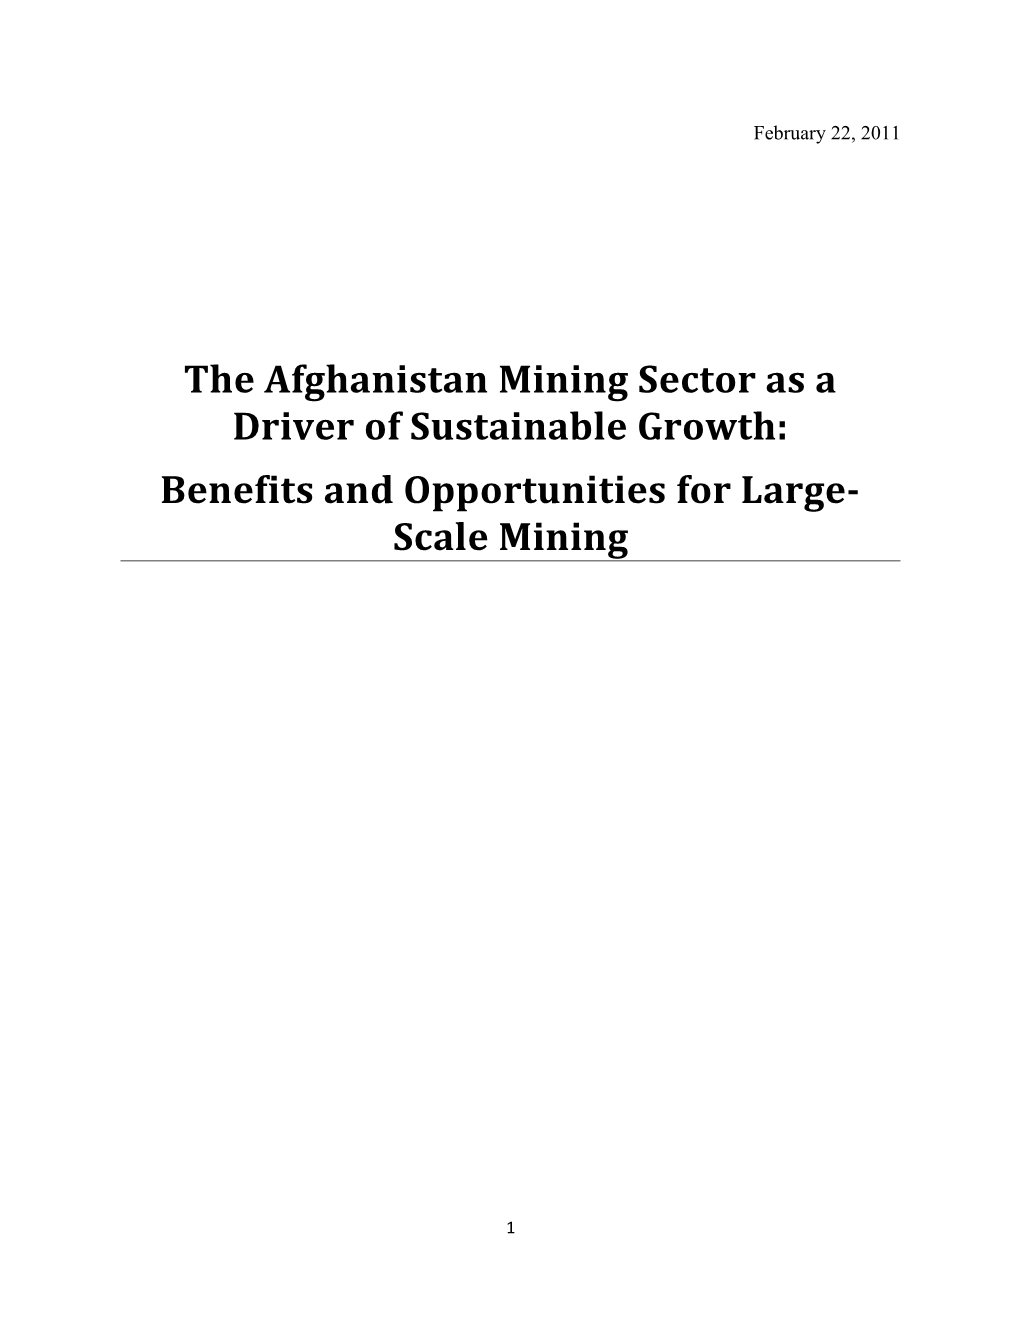 The Afghanistan Mining Sector As a Driver of Sustainable Growth